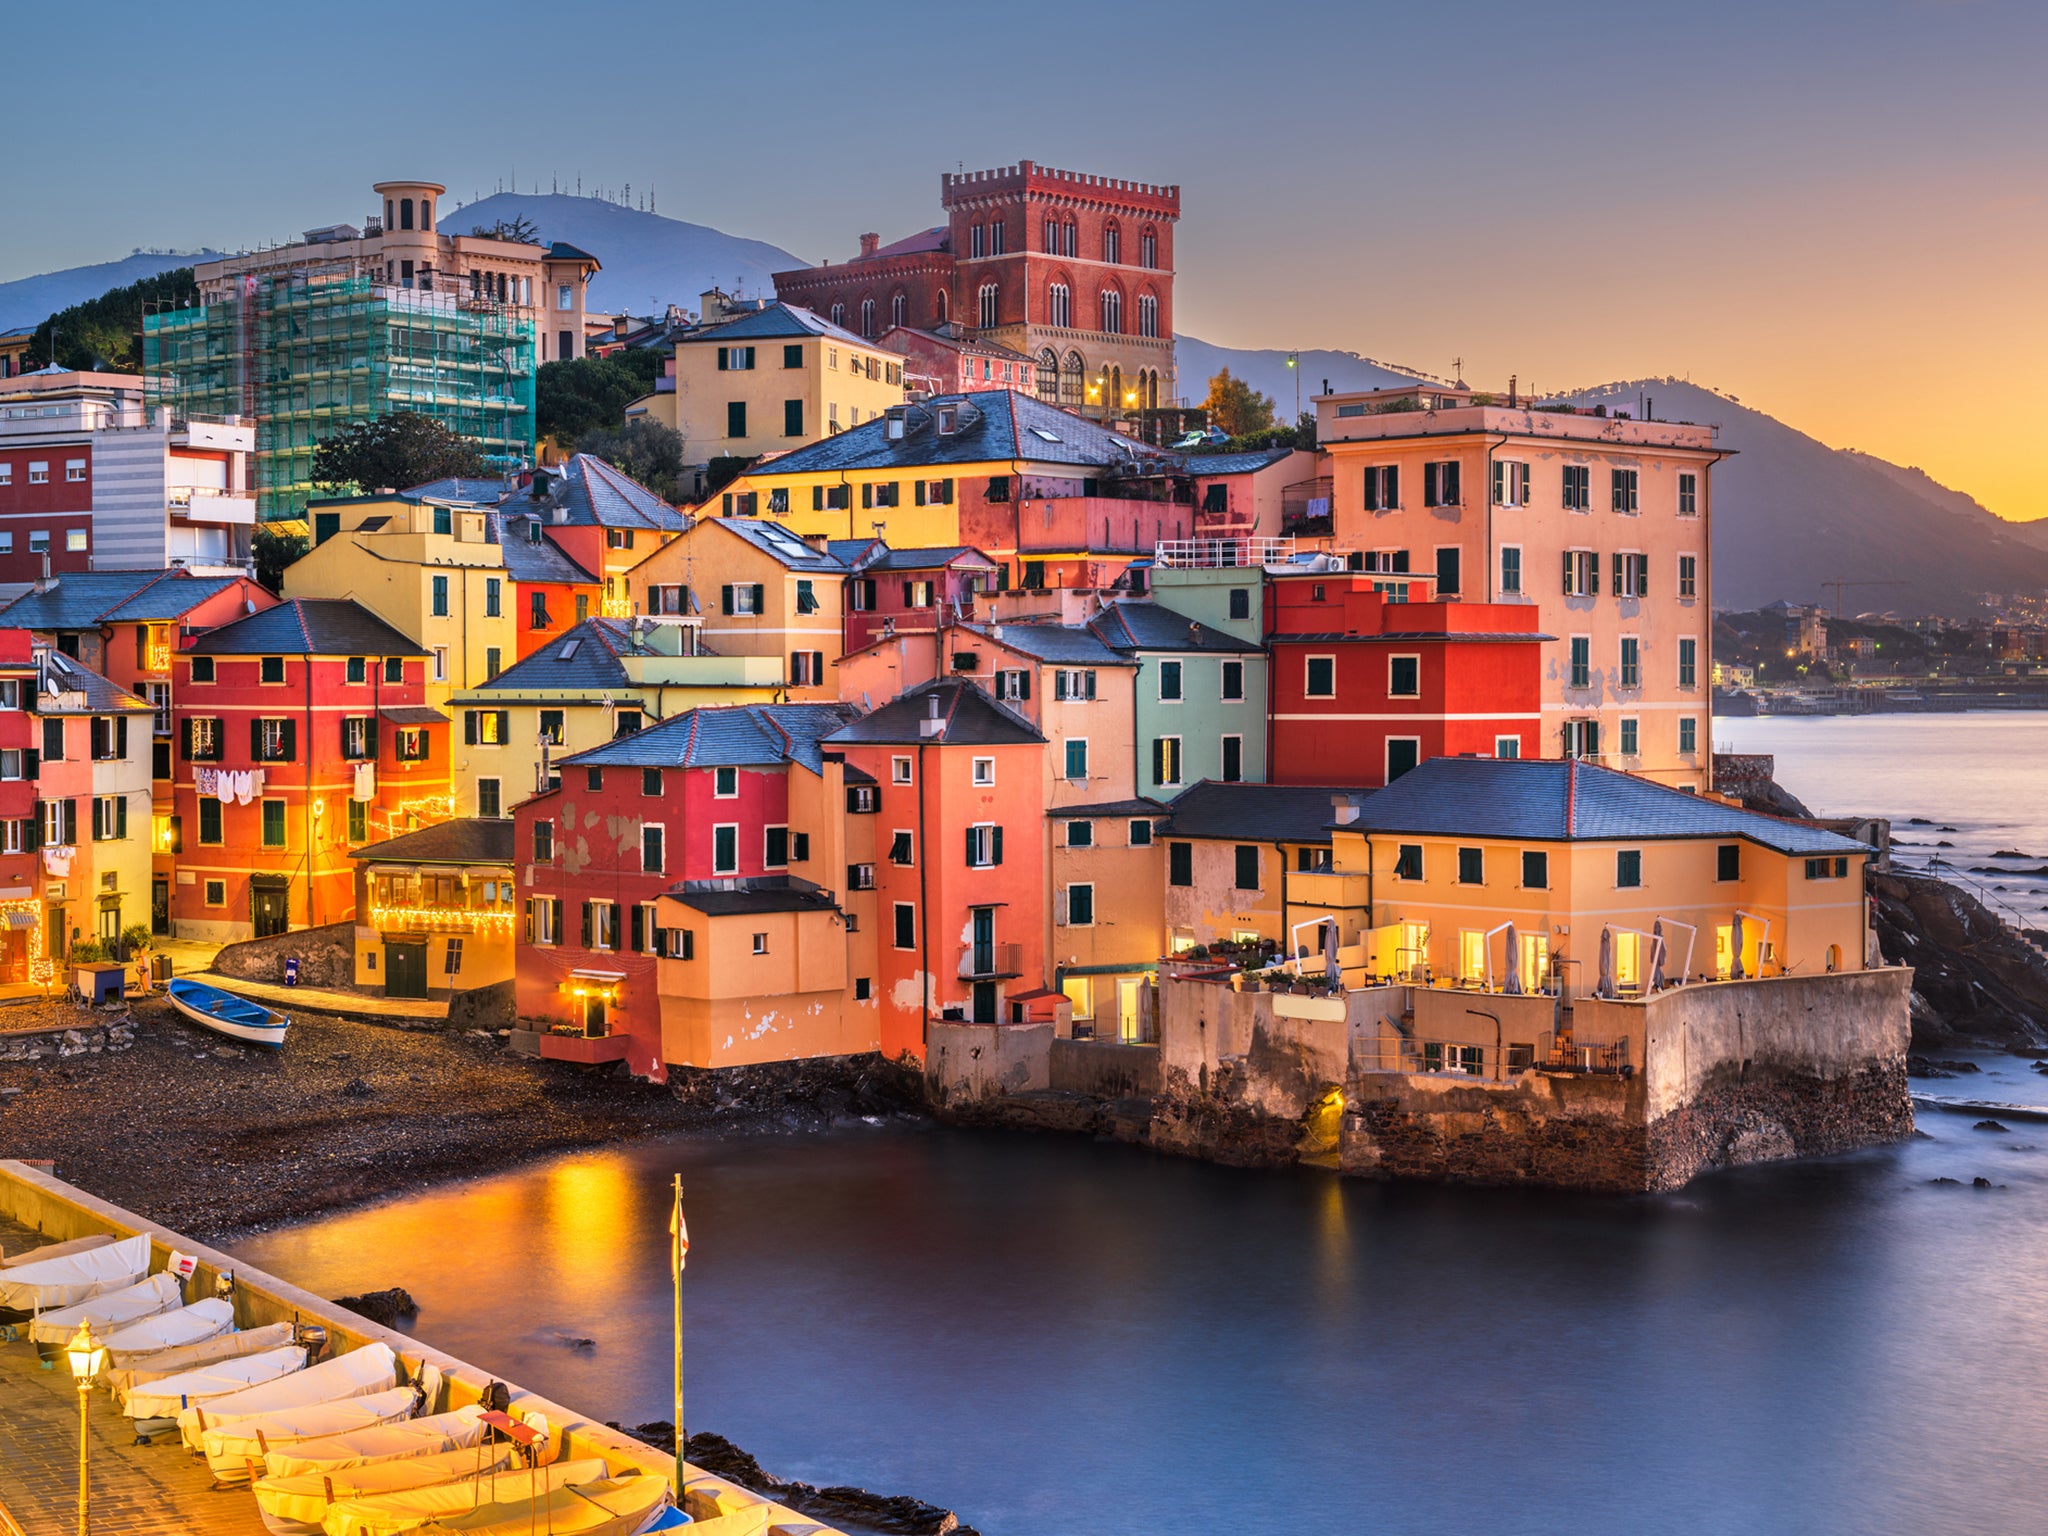 Genoa has delights to discover for those seeking authentic Italian charm